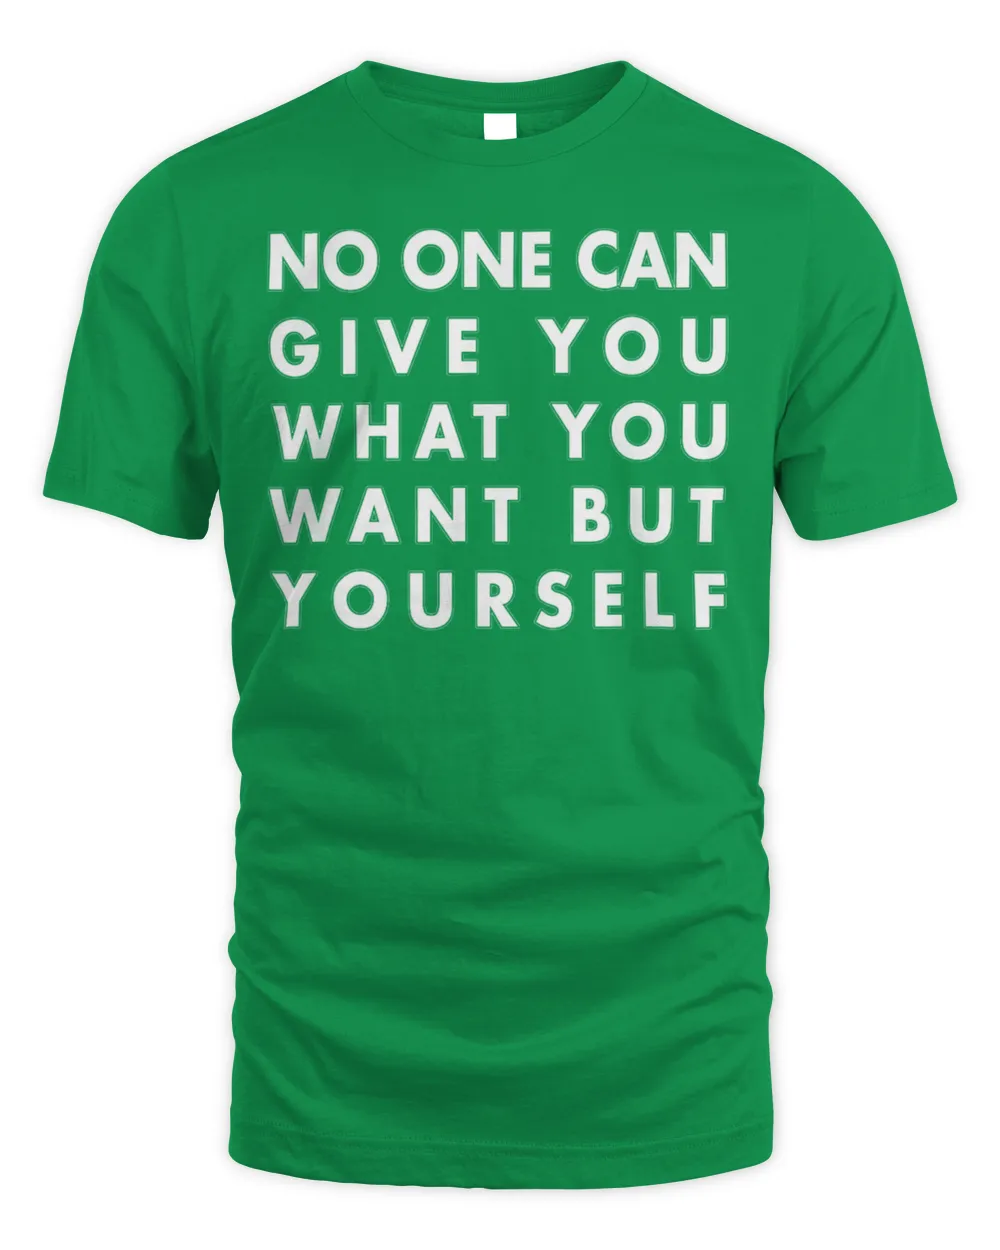 No one can give you what you want but yourself T-Shirt